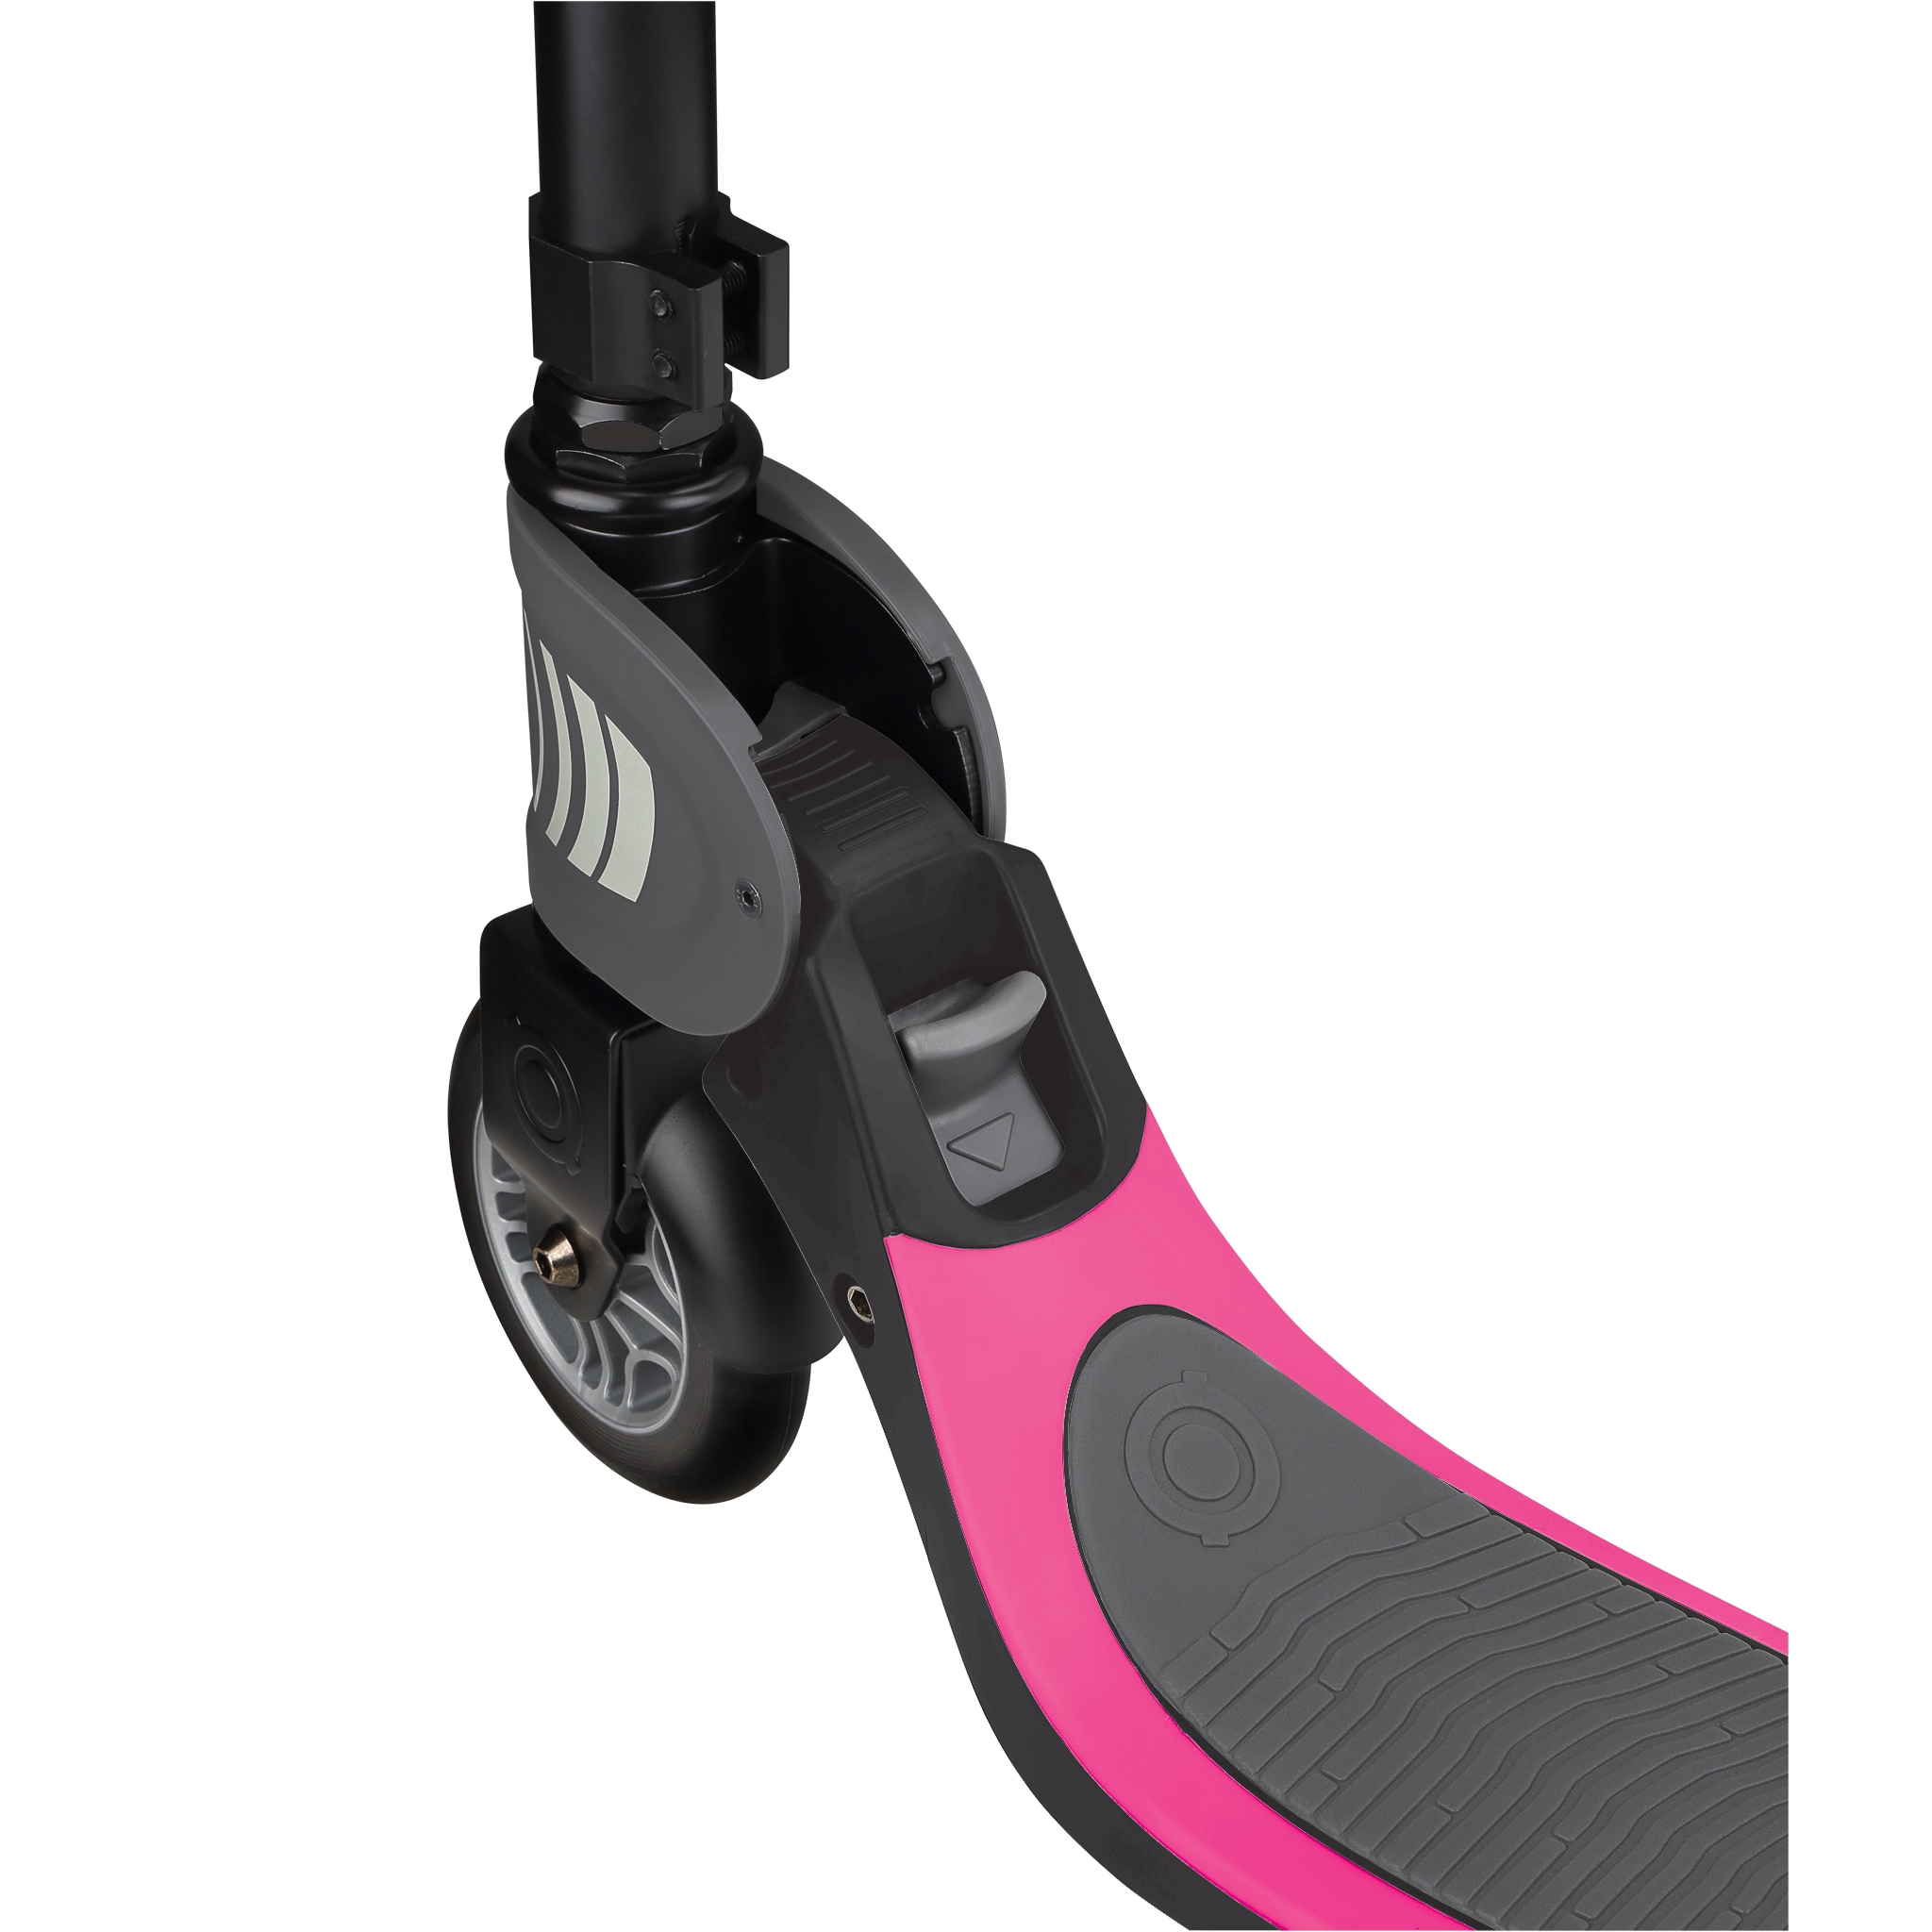 FLOW-FOLDABLE-125-2-wheel-folding-scooter-with-push-button-deep-pink 4